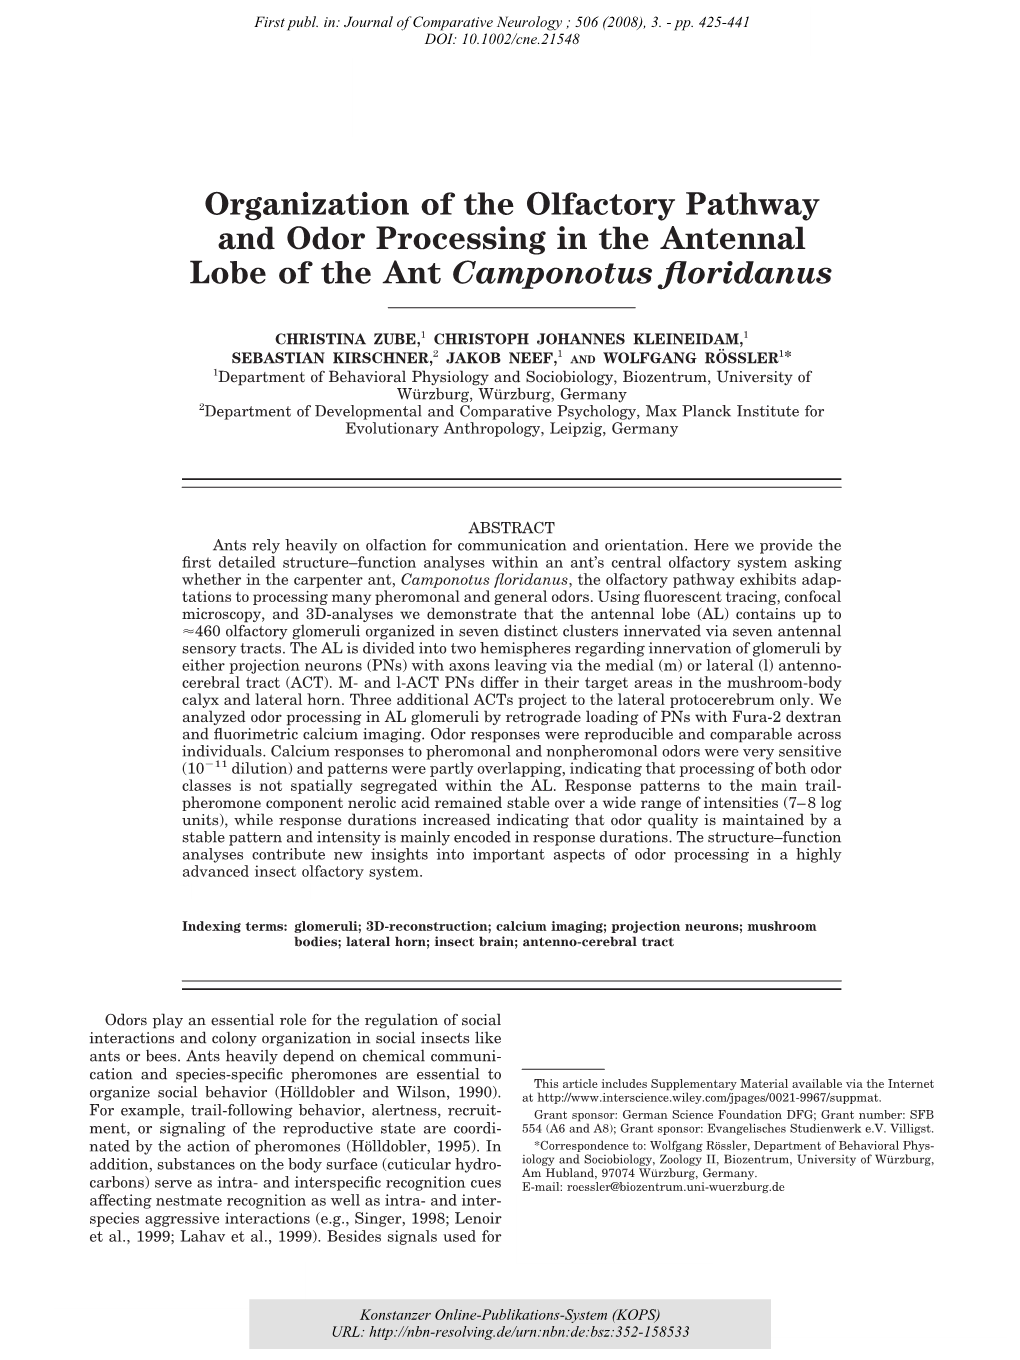 Organization of the Olfactory Pathway and Odor Processing in the Antennal Lobe of the Ant Camponotus ﬂoridanus